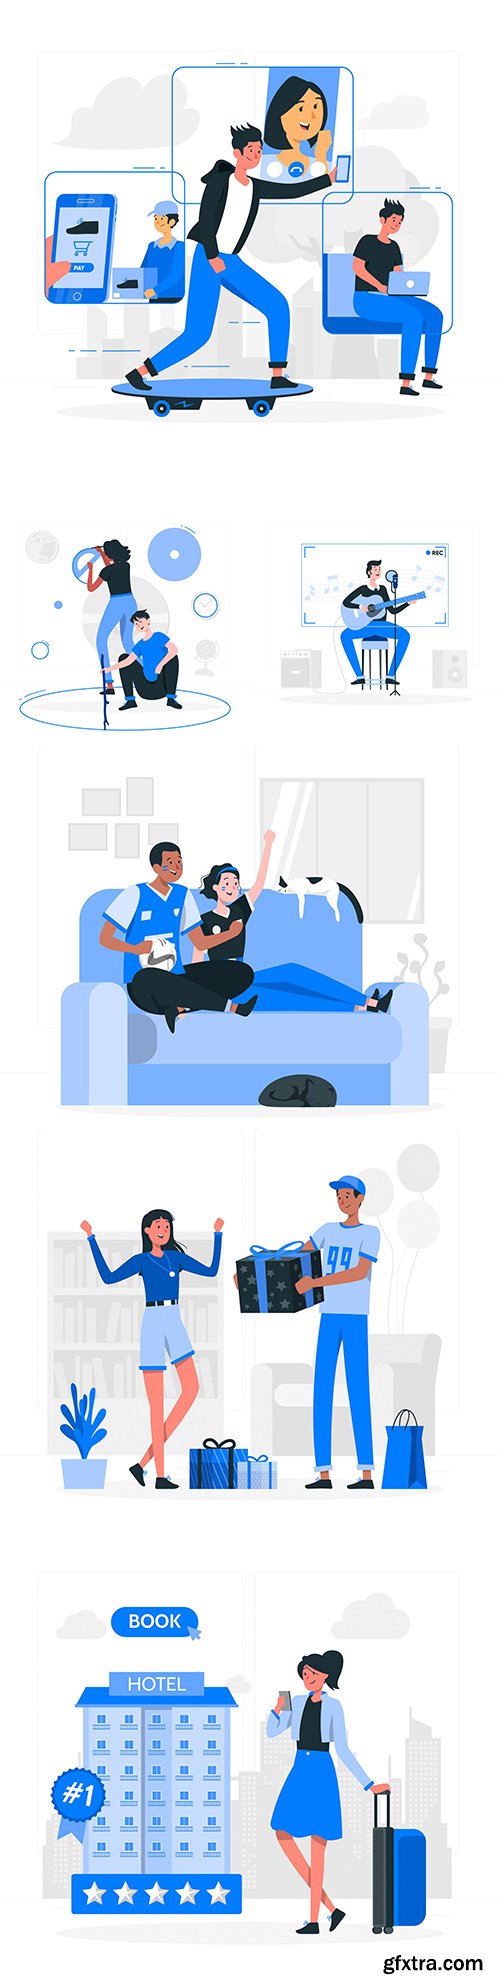 People and mobile lifestyle concept illustration flat design